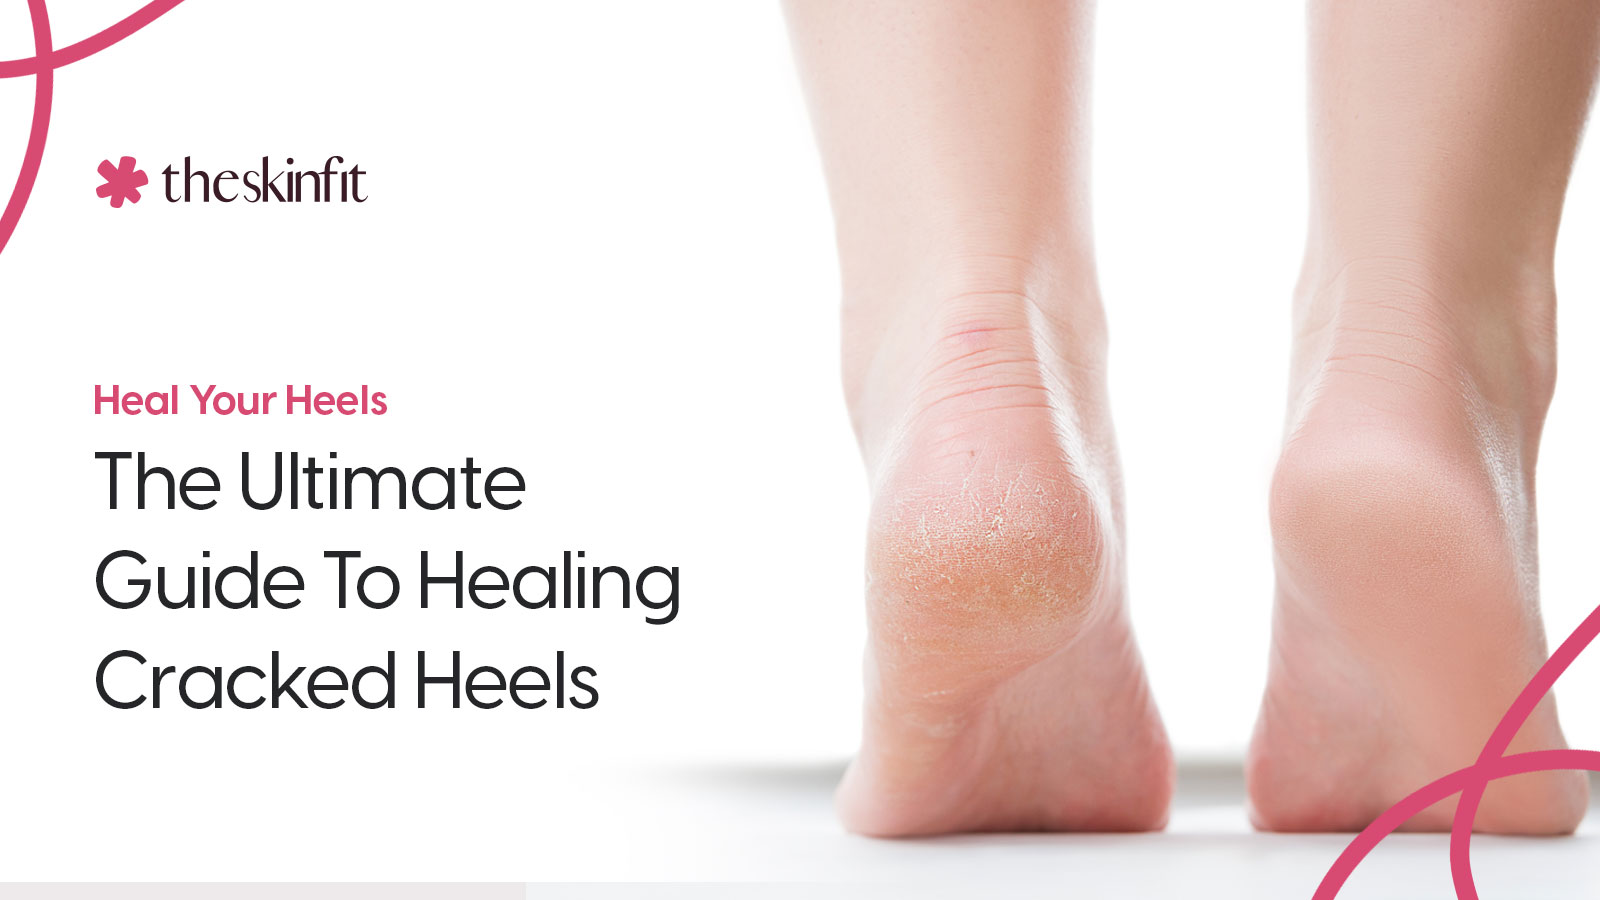 Heal Your Heels: The Ultimate Guide To Healing Cracked Heels